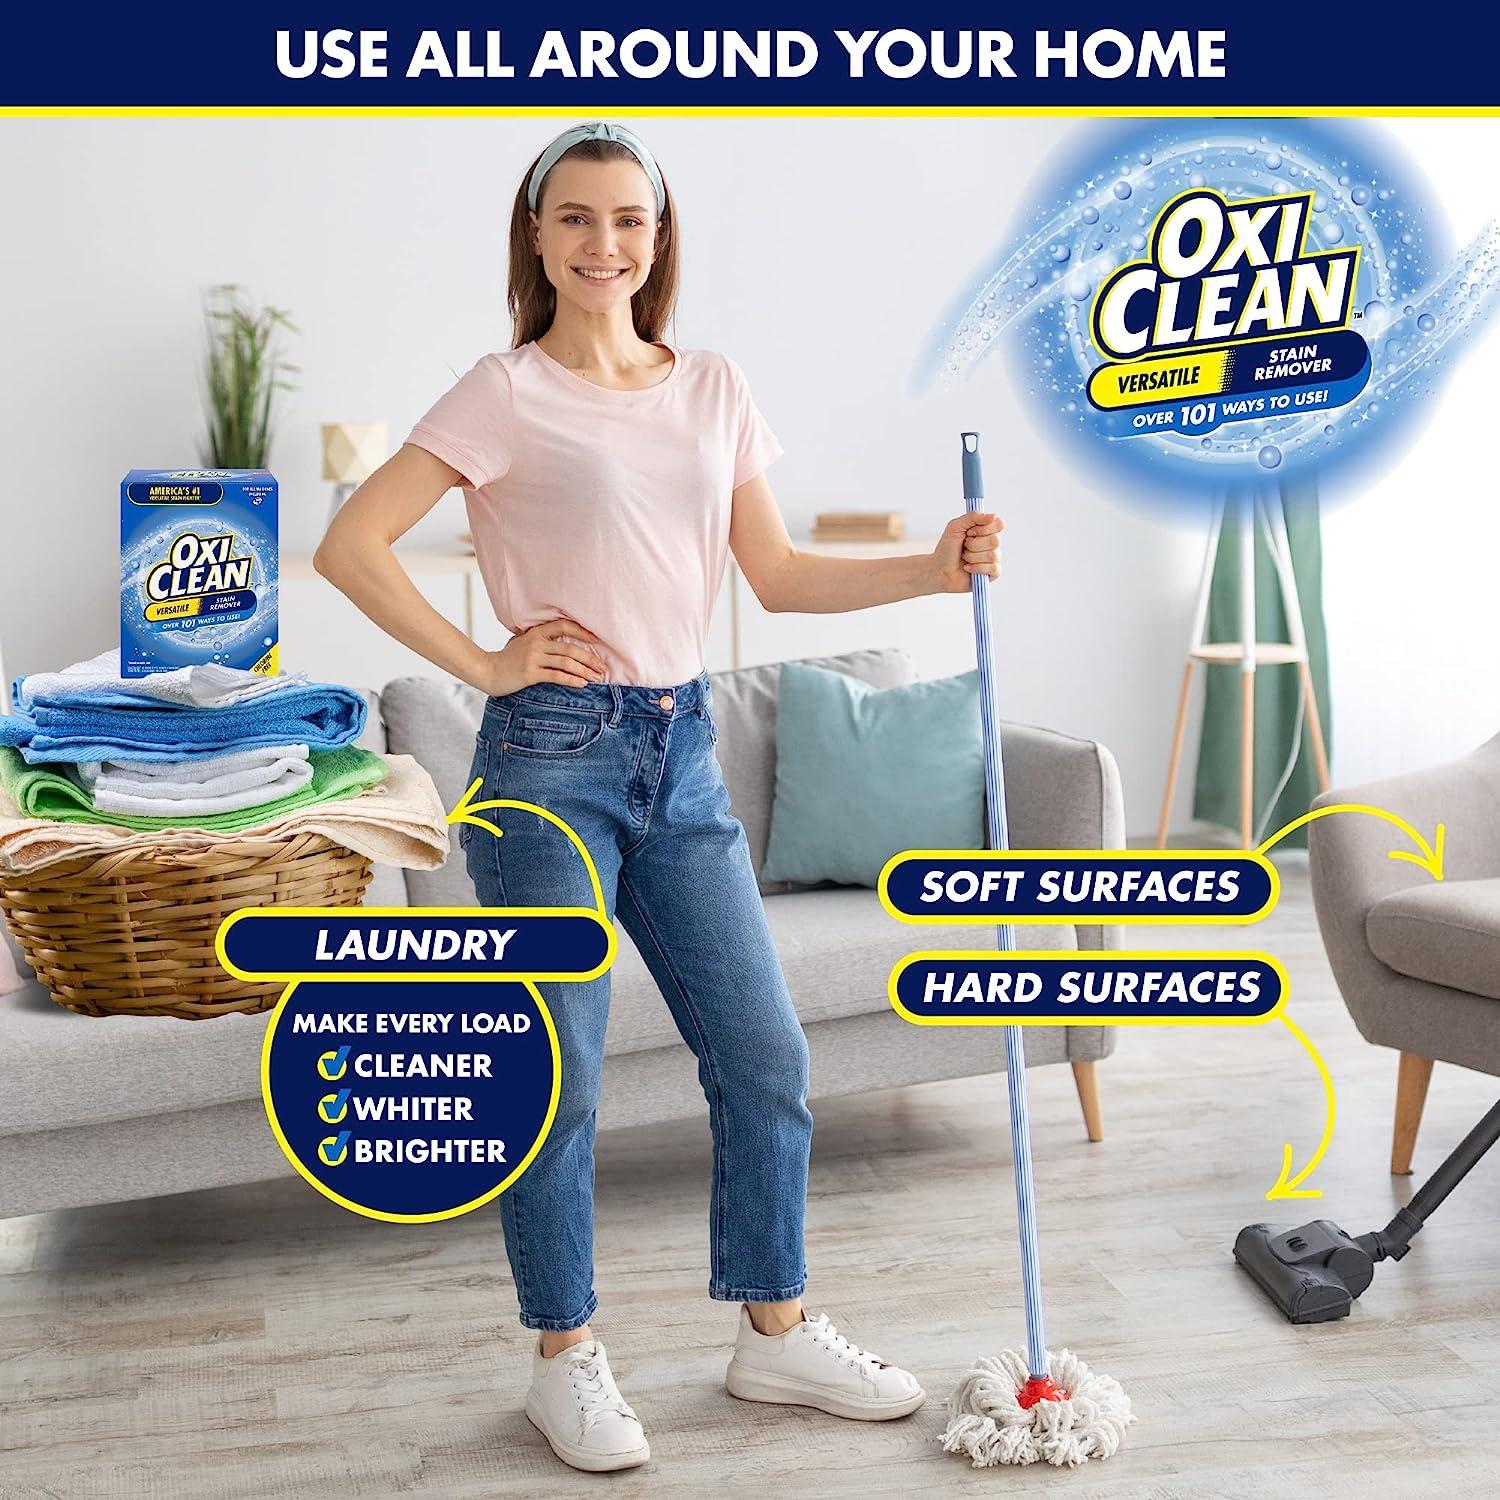 OxiClean™ Baby Stain Remover Powder